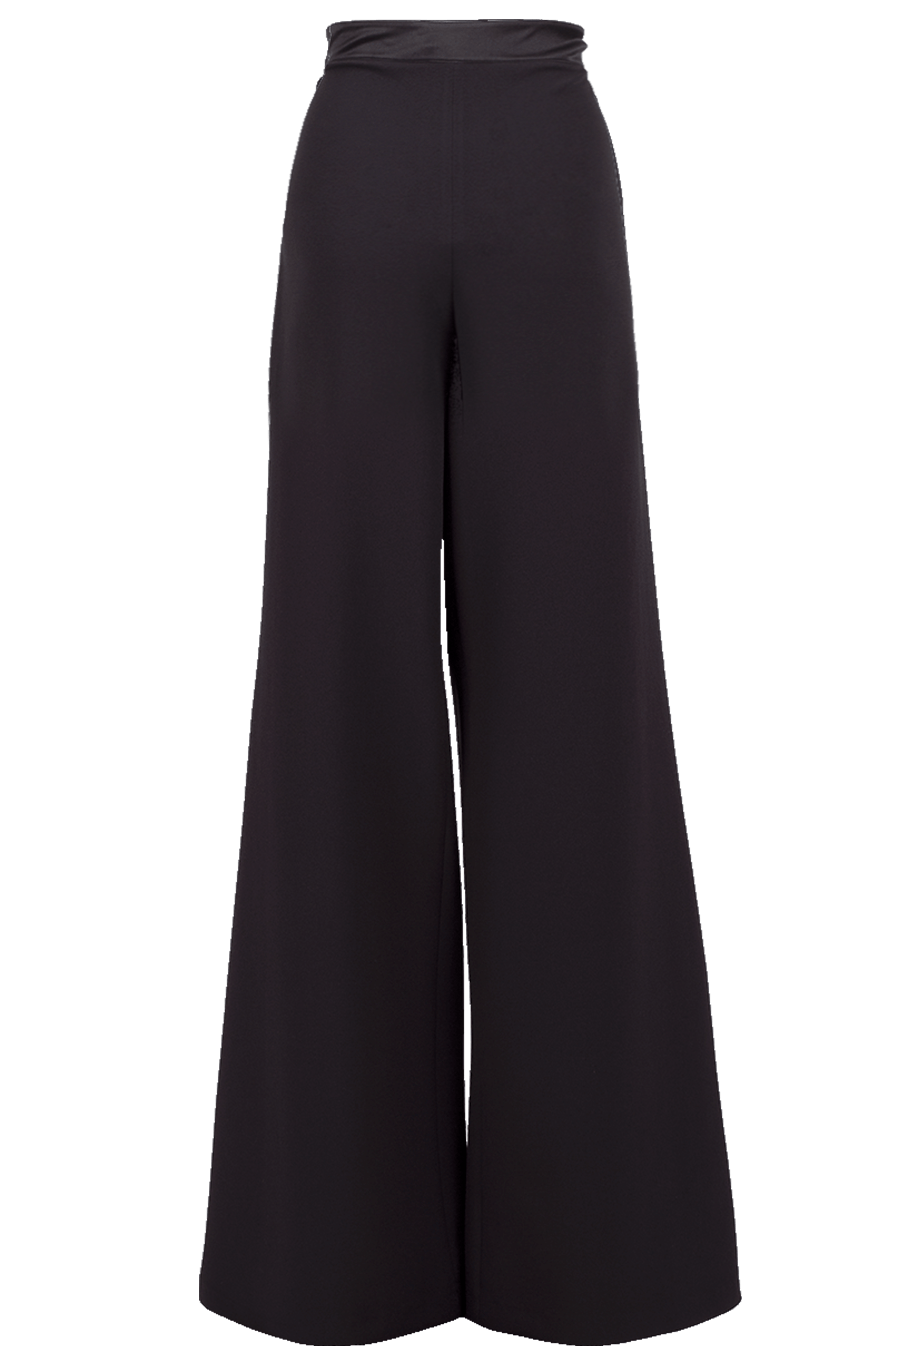 Wide Leg Pant – Marissa Collections